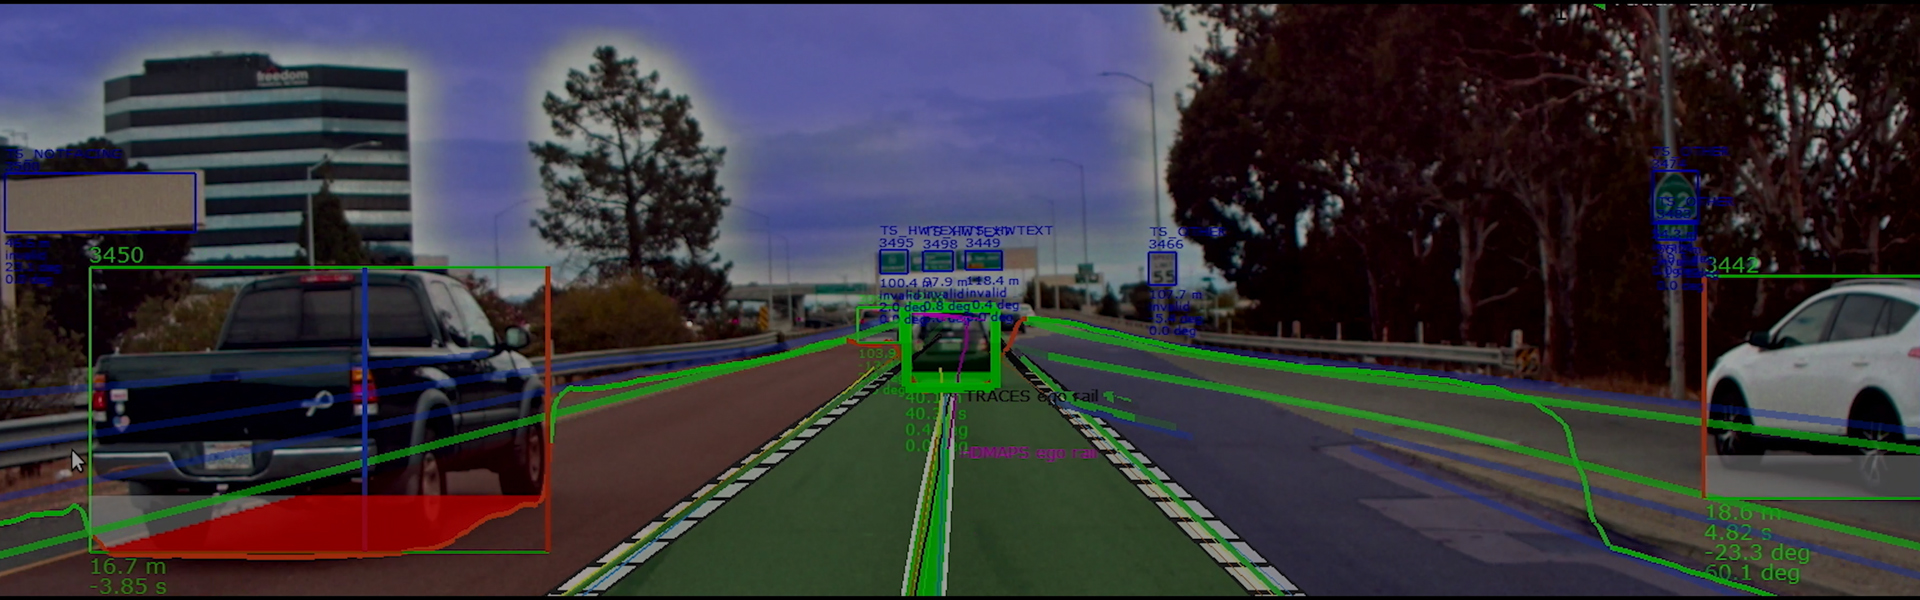 Calculations of how far away a truck is from an automated vehicle. Shows how the automated vehicle sees the other car.